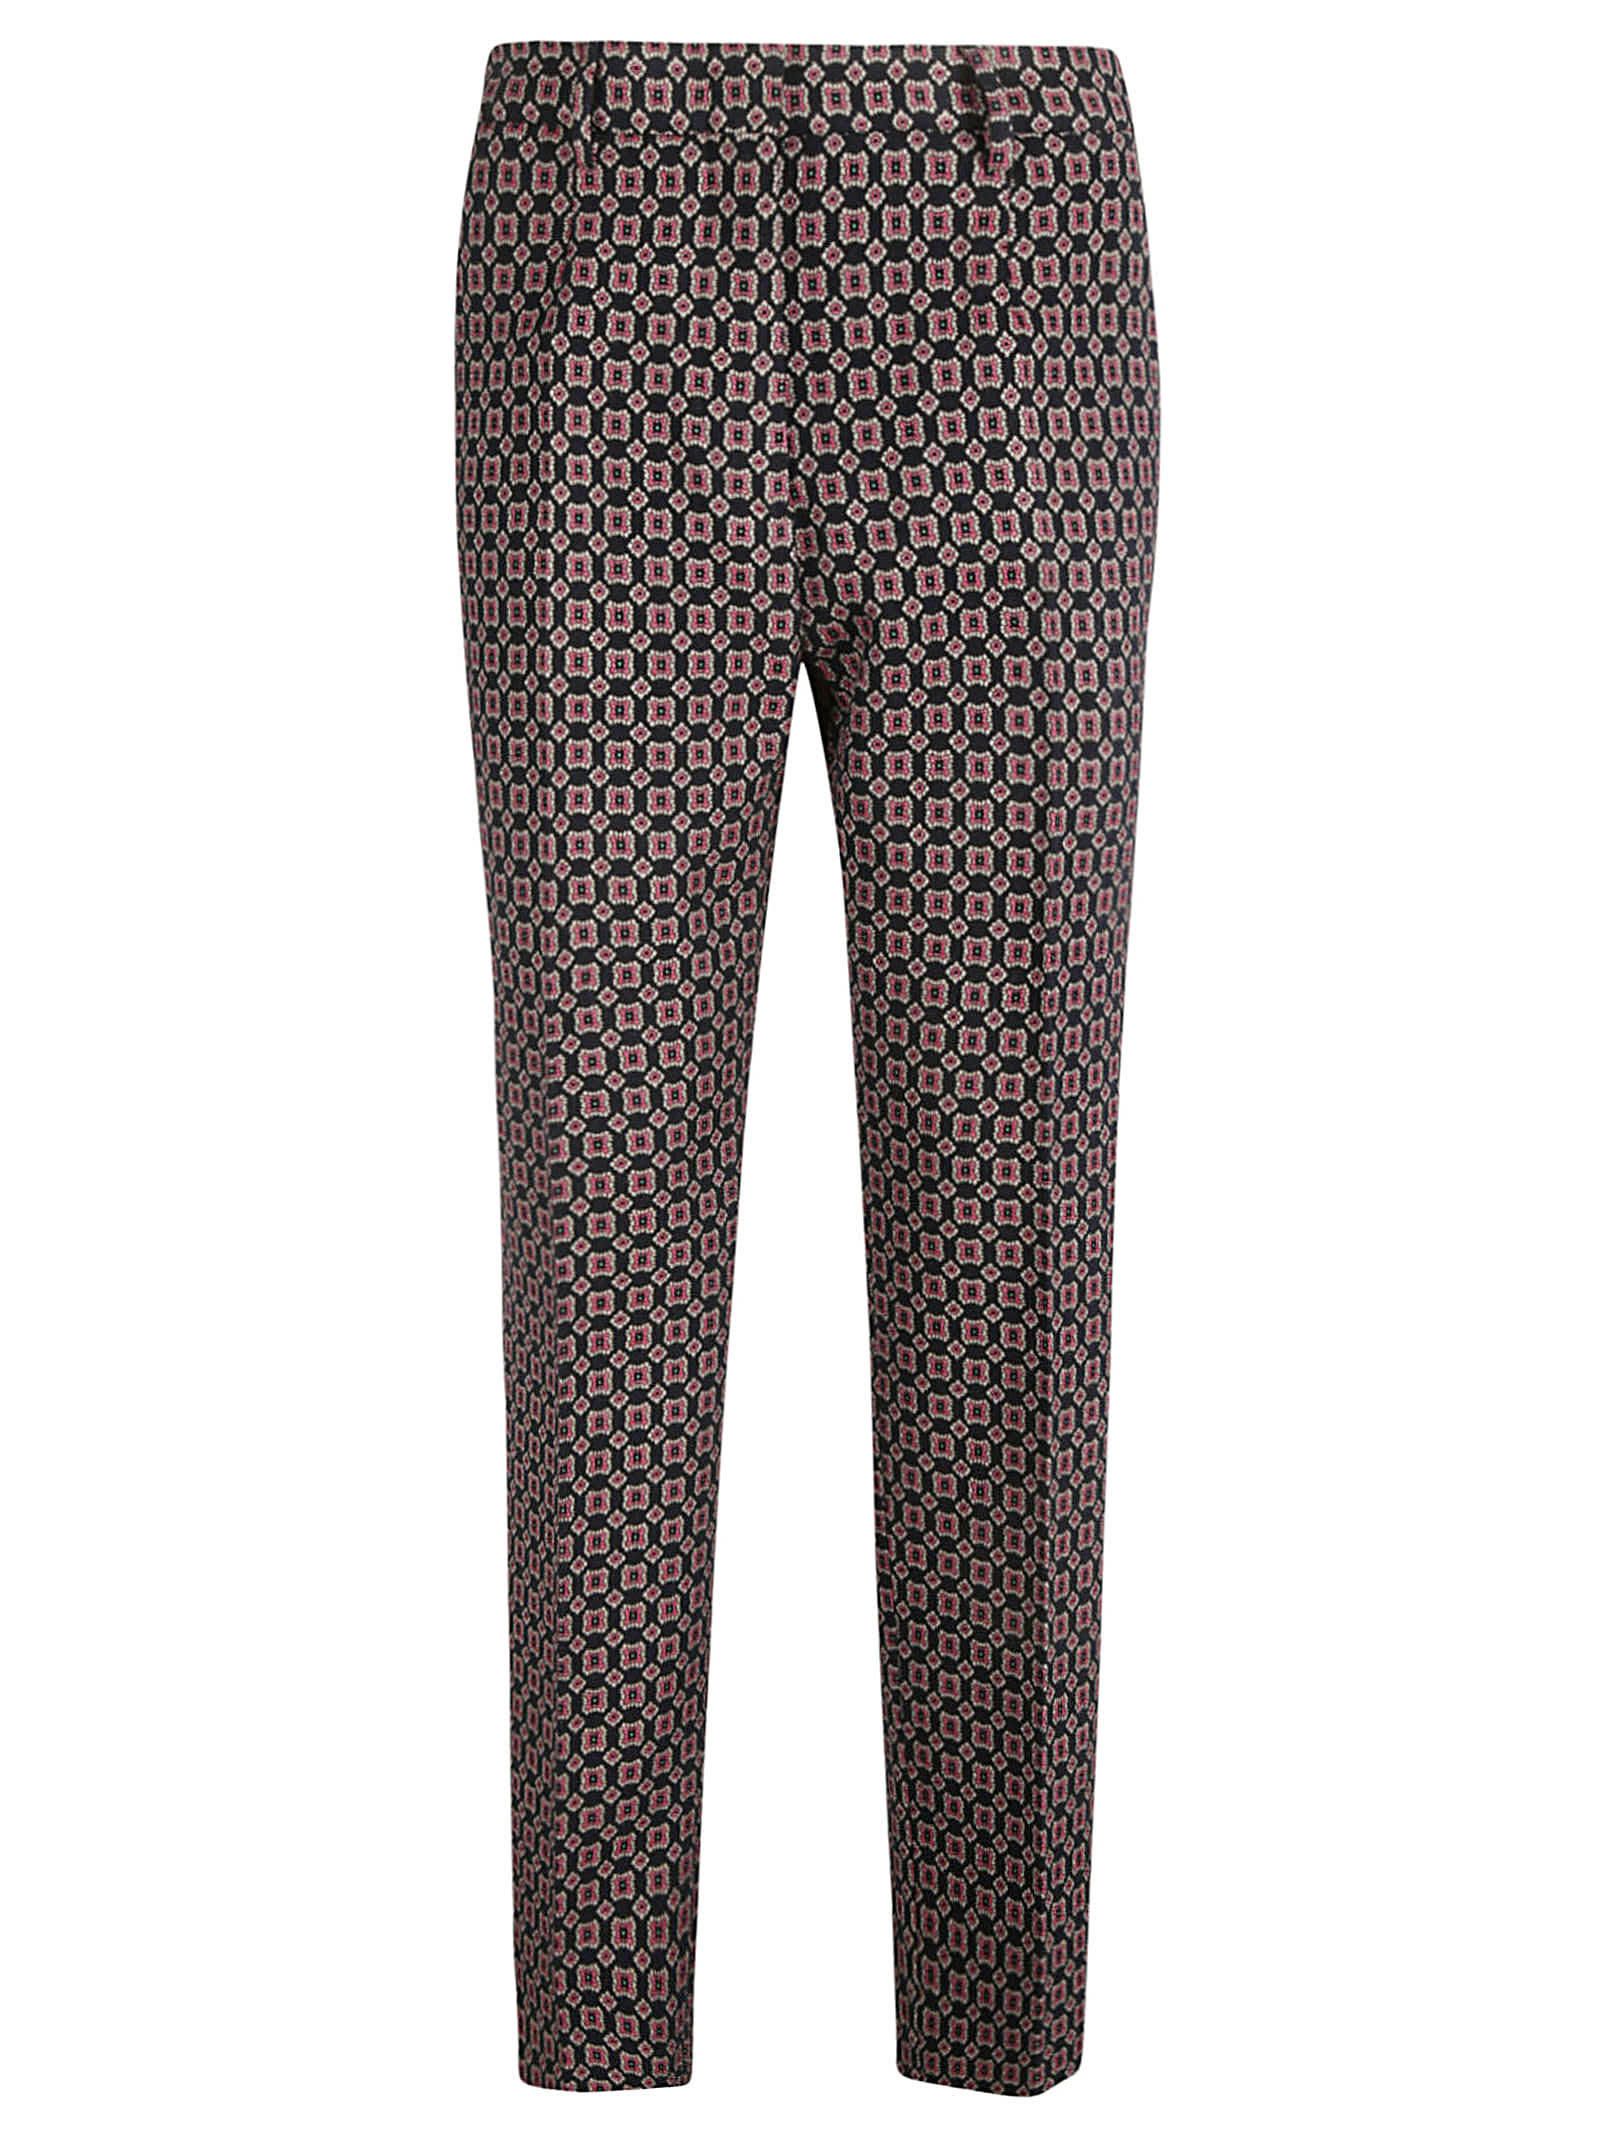 Etro All-over Print Cropped Trousers